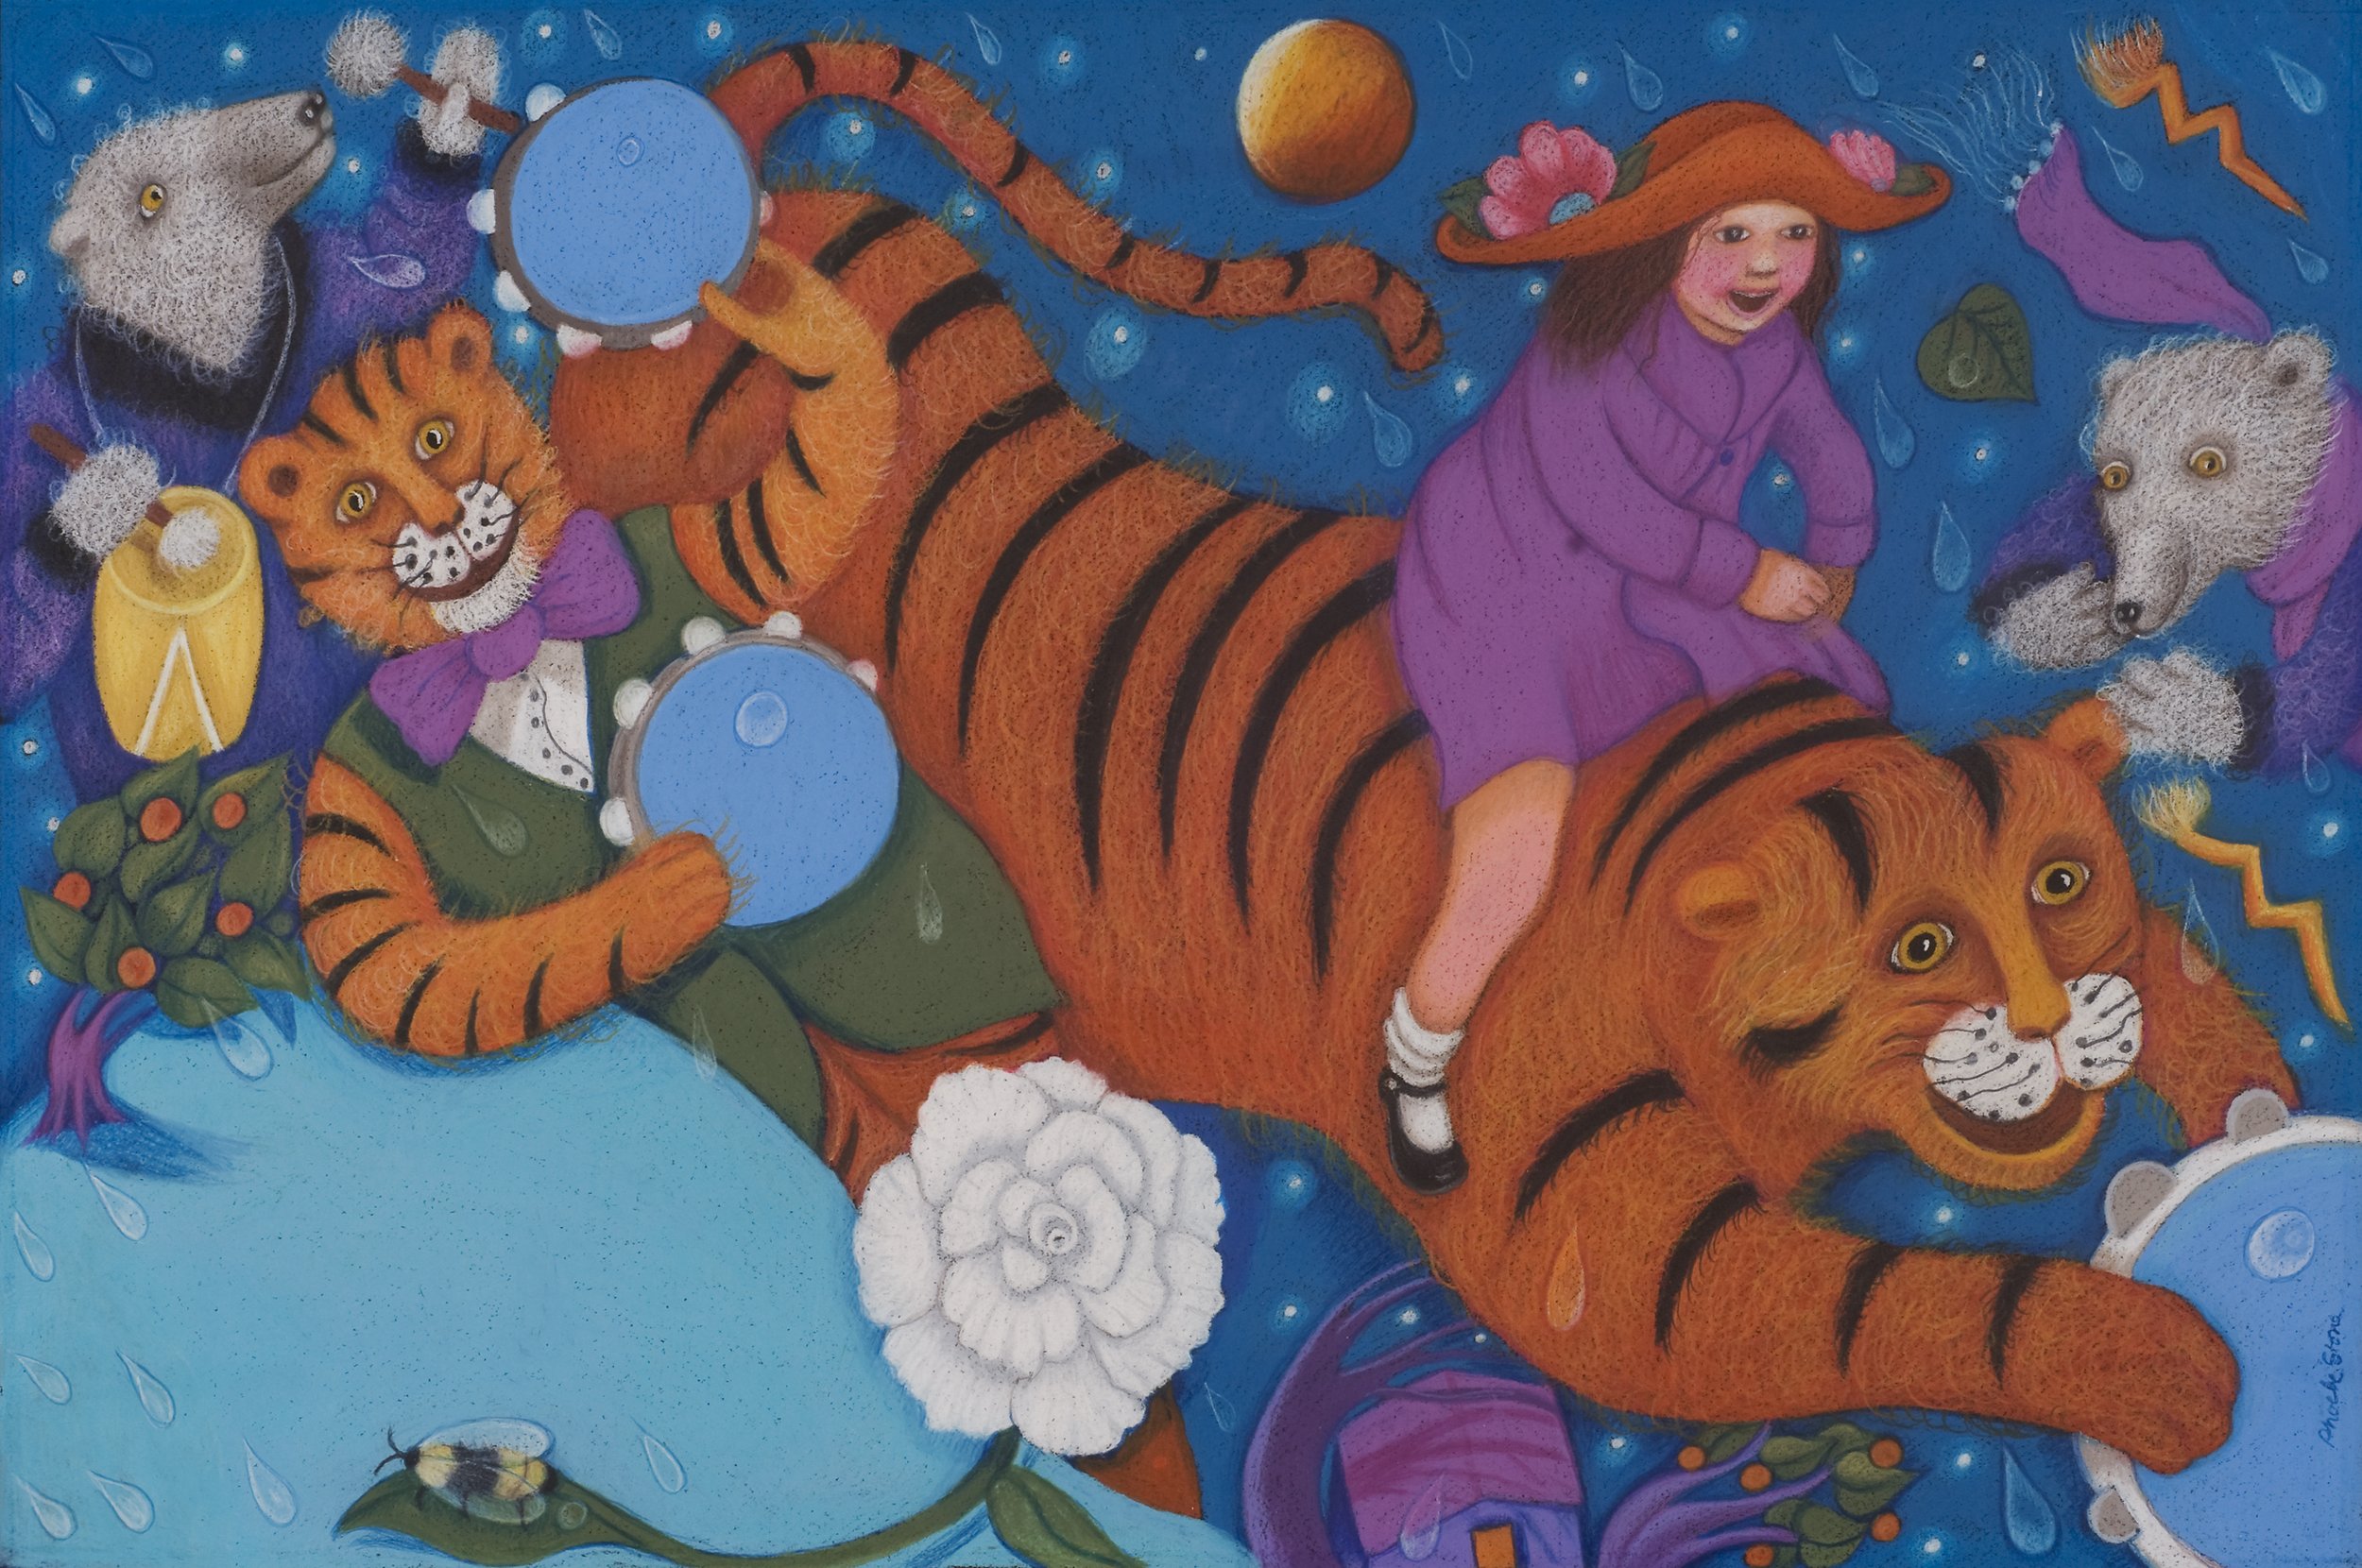 Phoebe Stone; "Tigers with Tambourines," 1997; Pastel; From "When the Wind Bears Go Dancing"